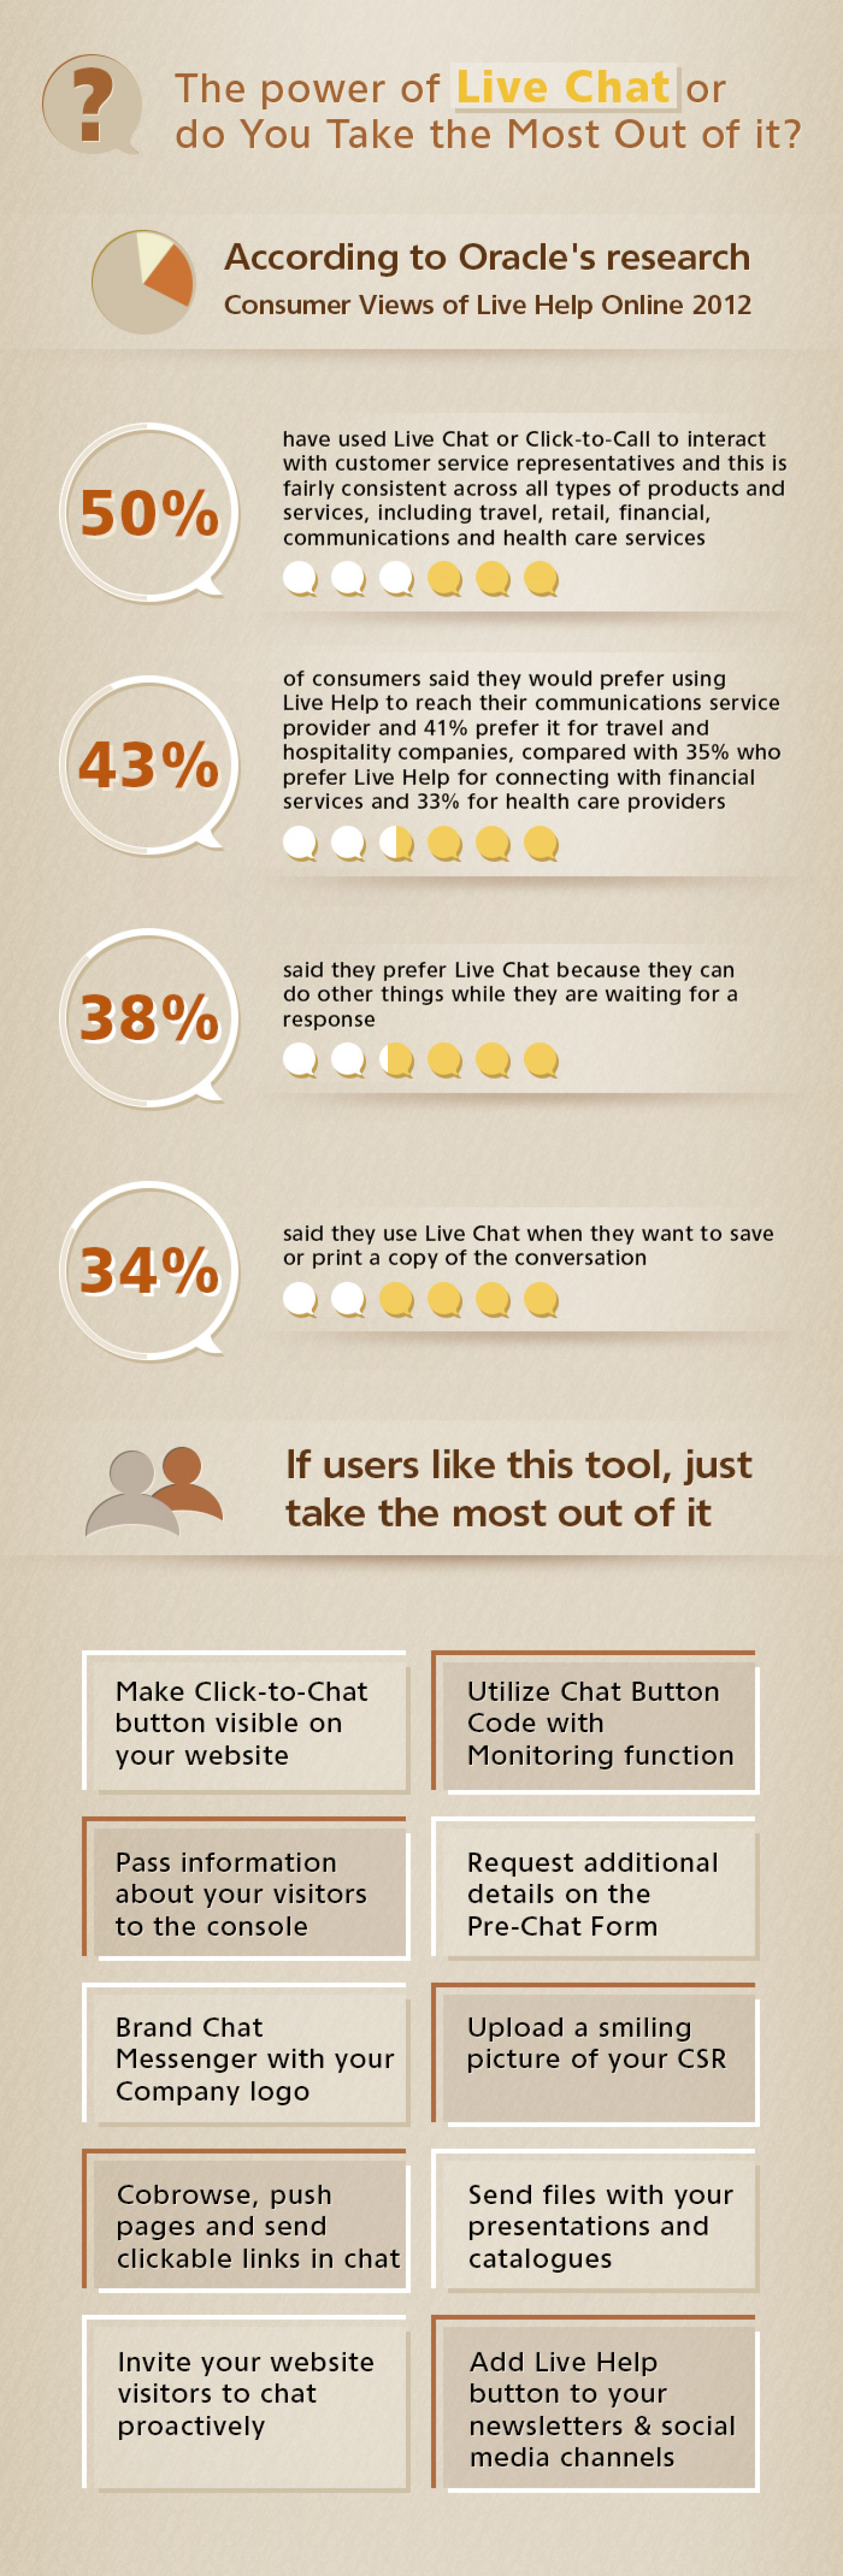 The Power of Live Chat, or Are You Taking the Most Out of It? Infographic